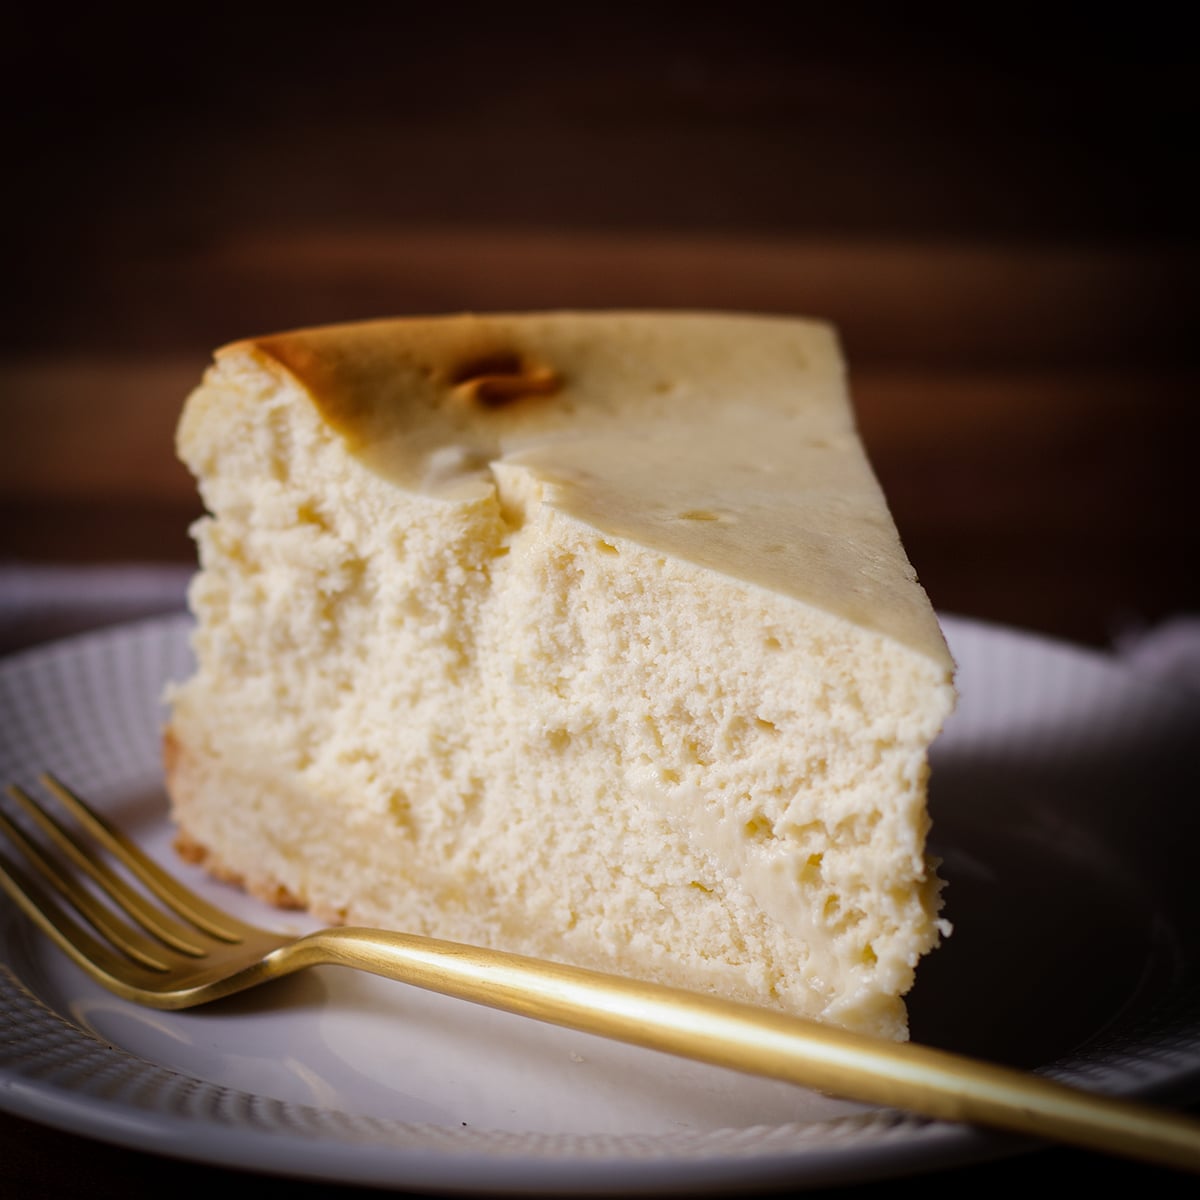 A thick slice of New York Cheesecake on a white plate with a gold fork.